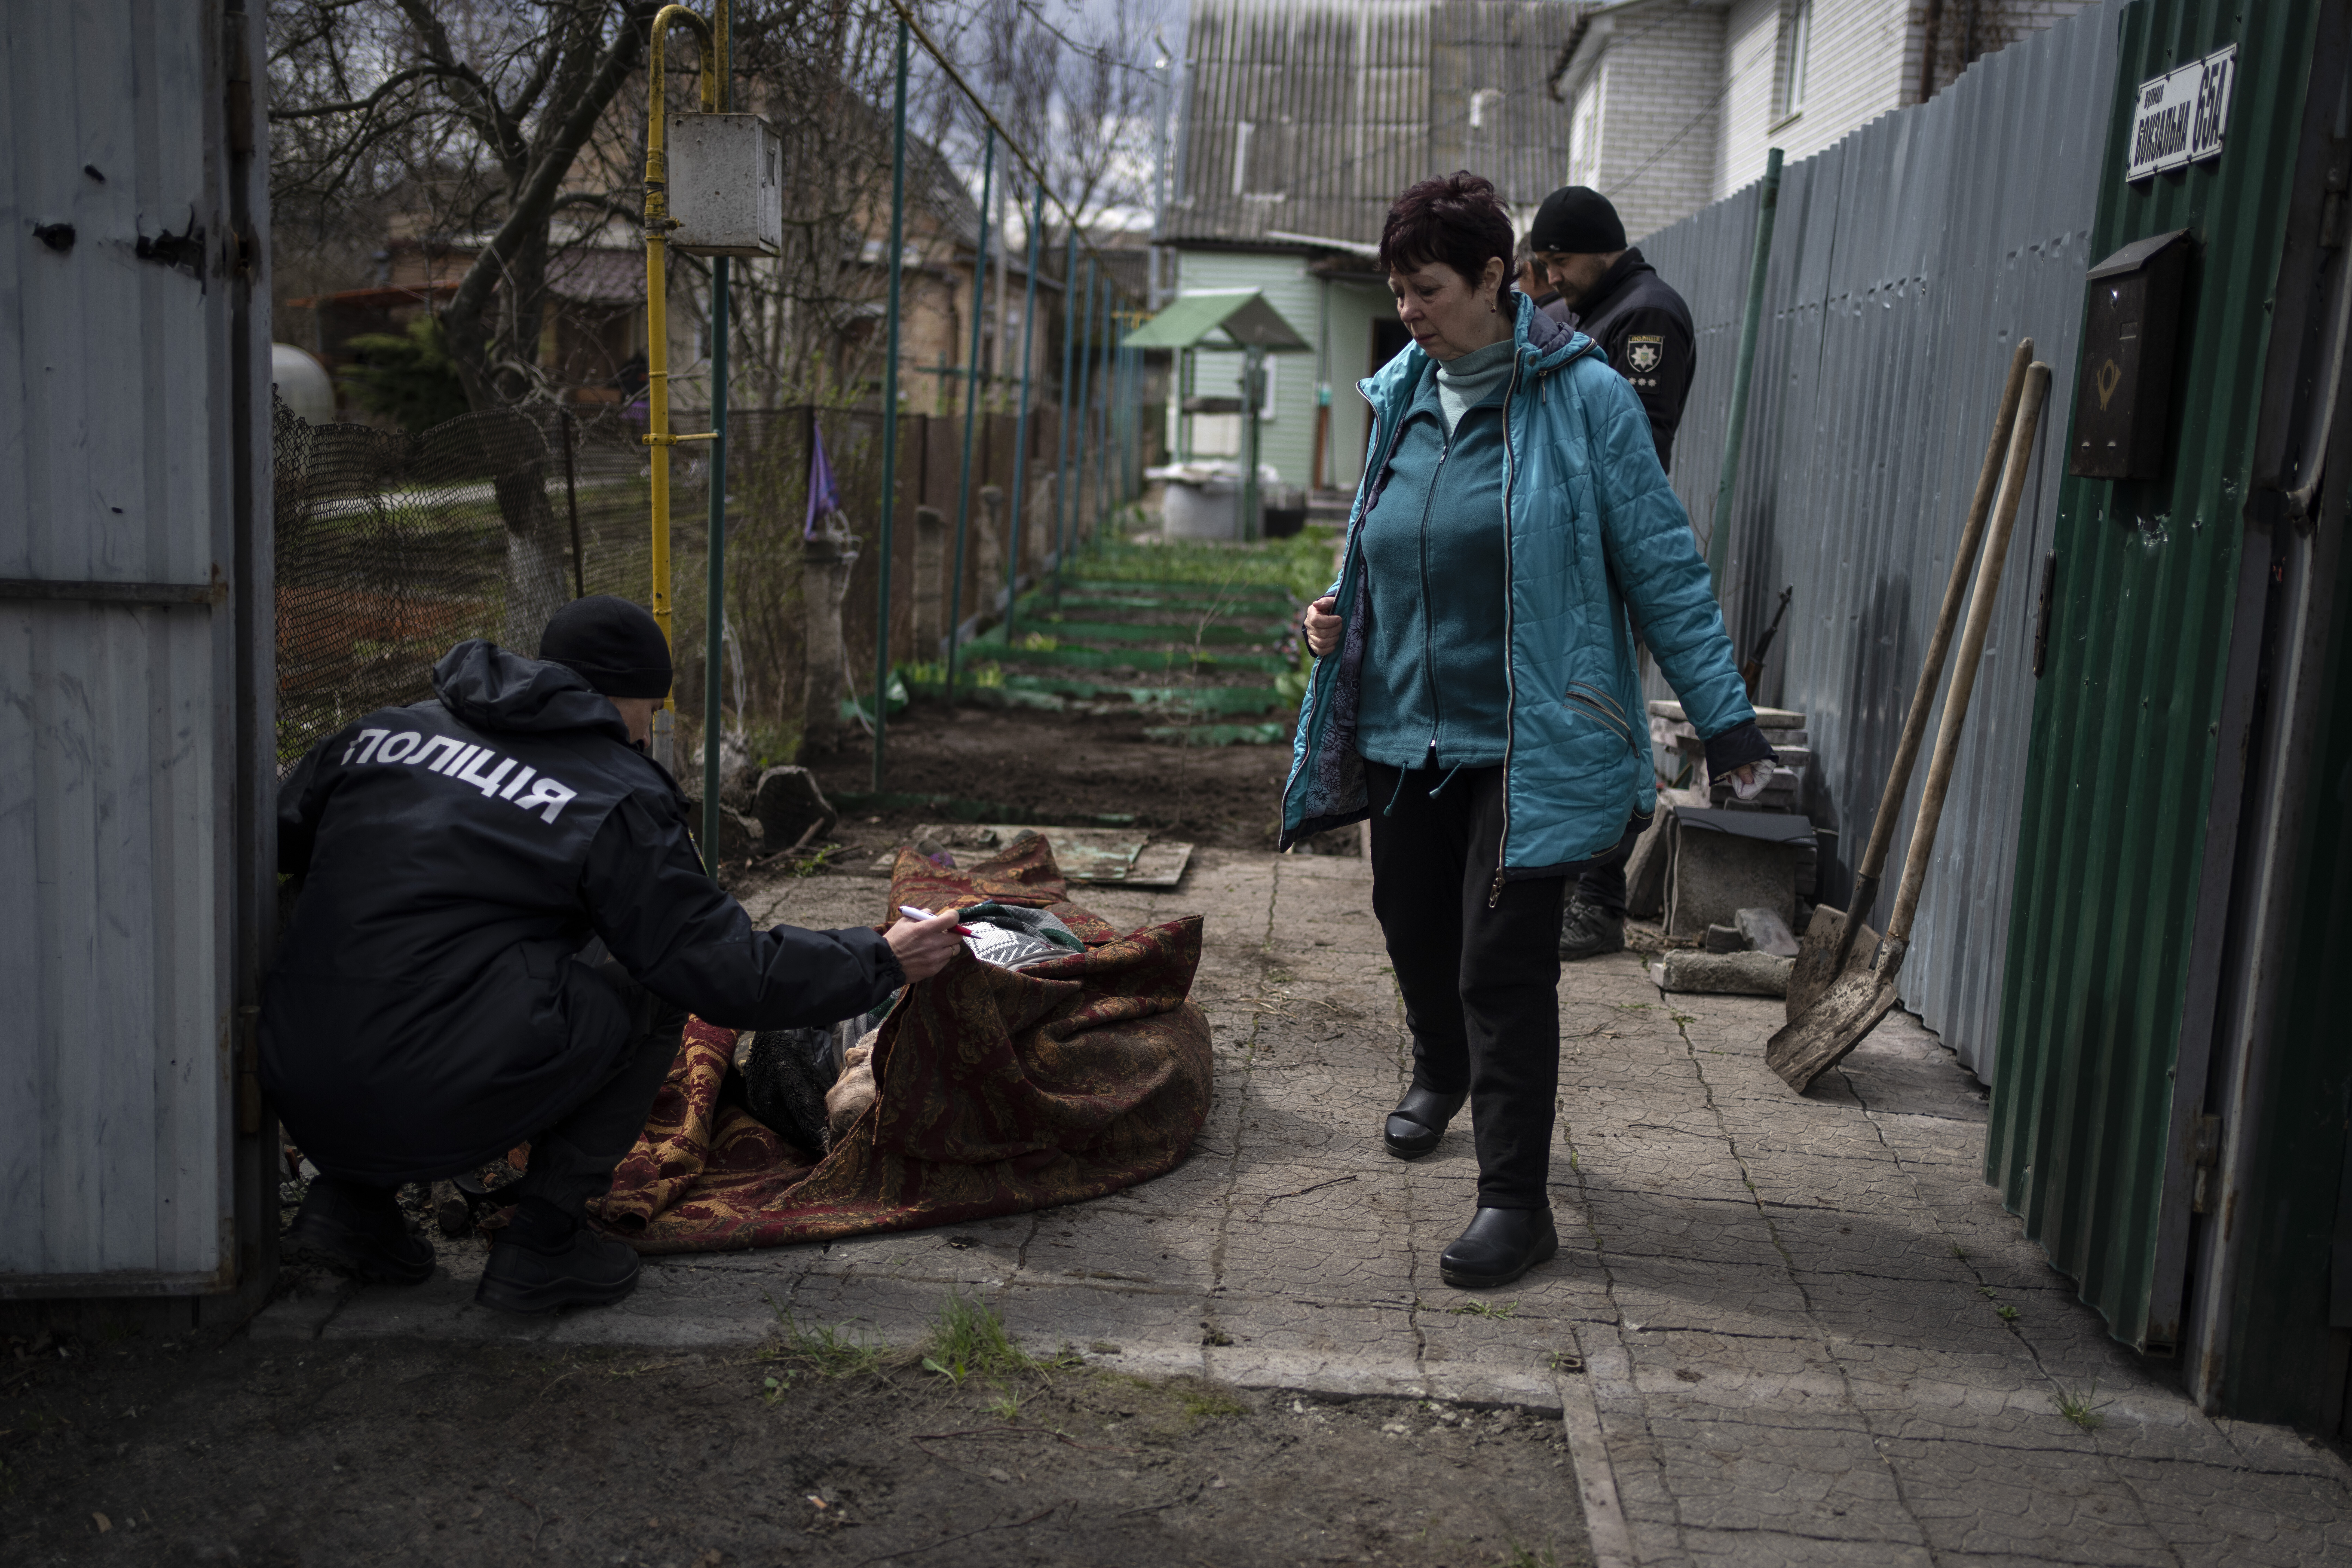 A police officer examines the corpse of a man killed during the war with Russia, in Bucha, located on the outskirts of Kyiv, Ukraine, on April 11.